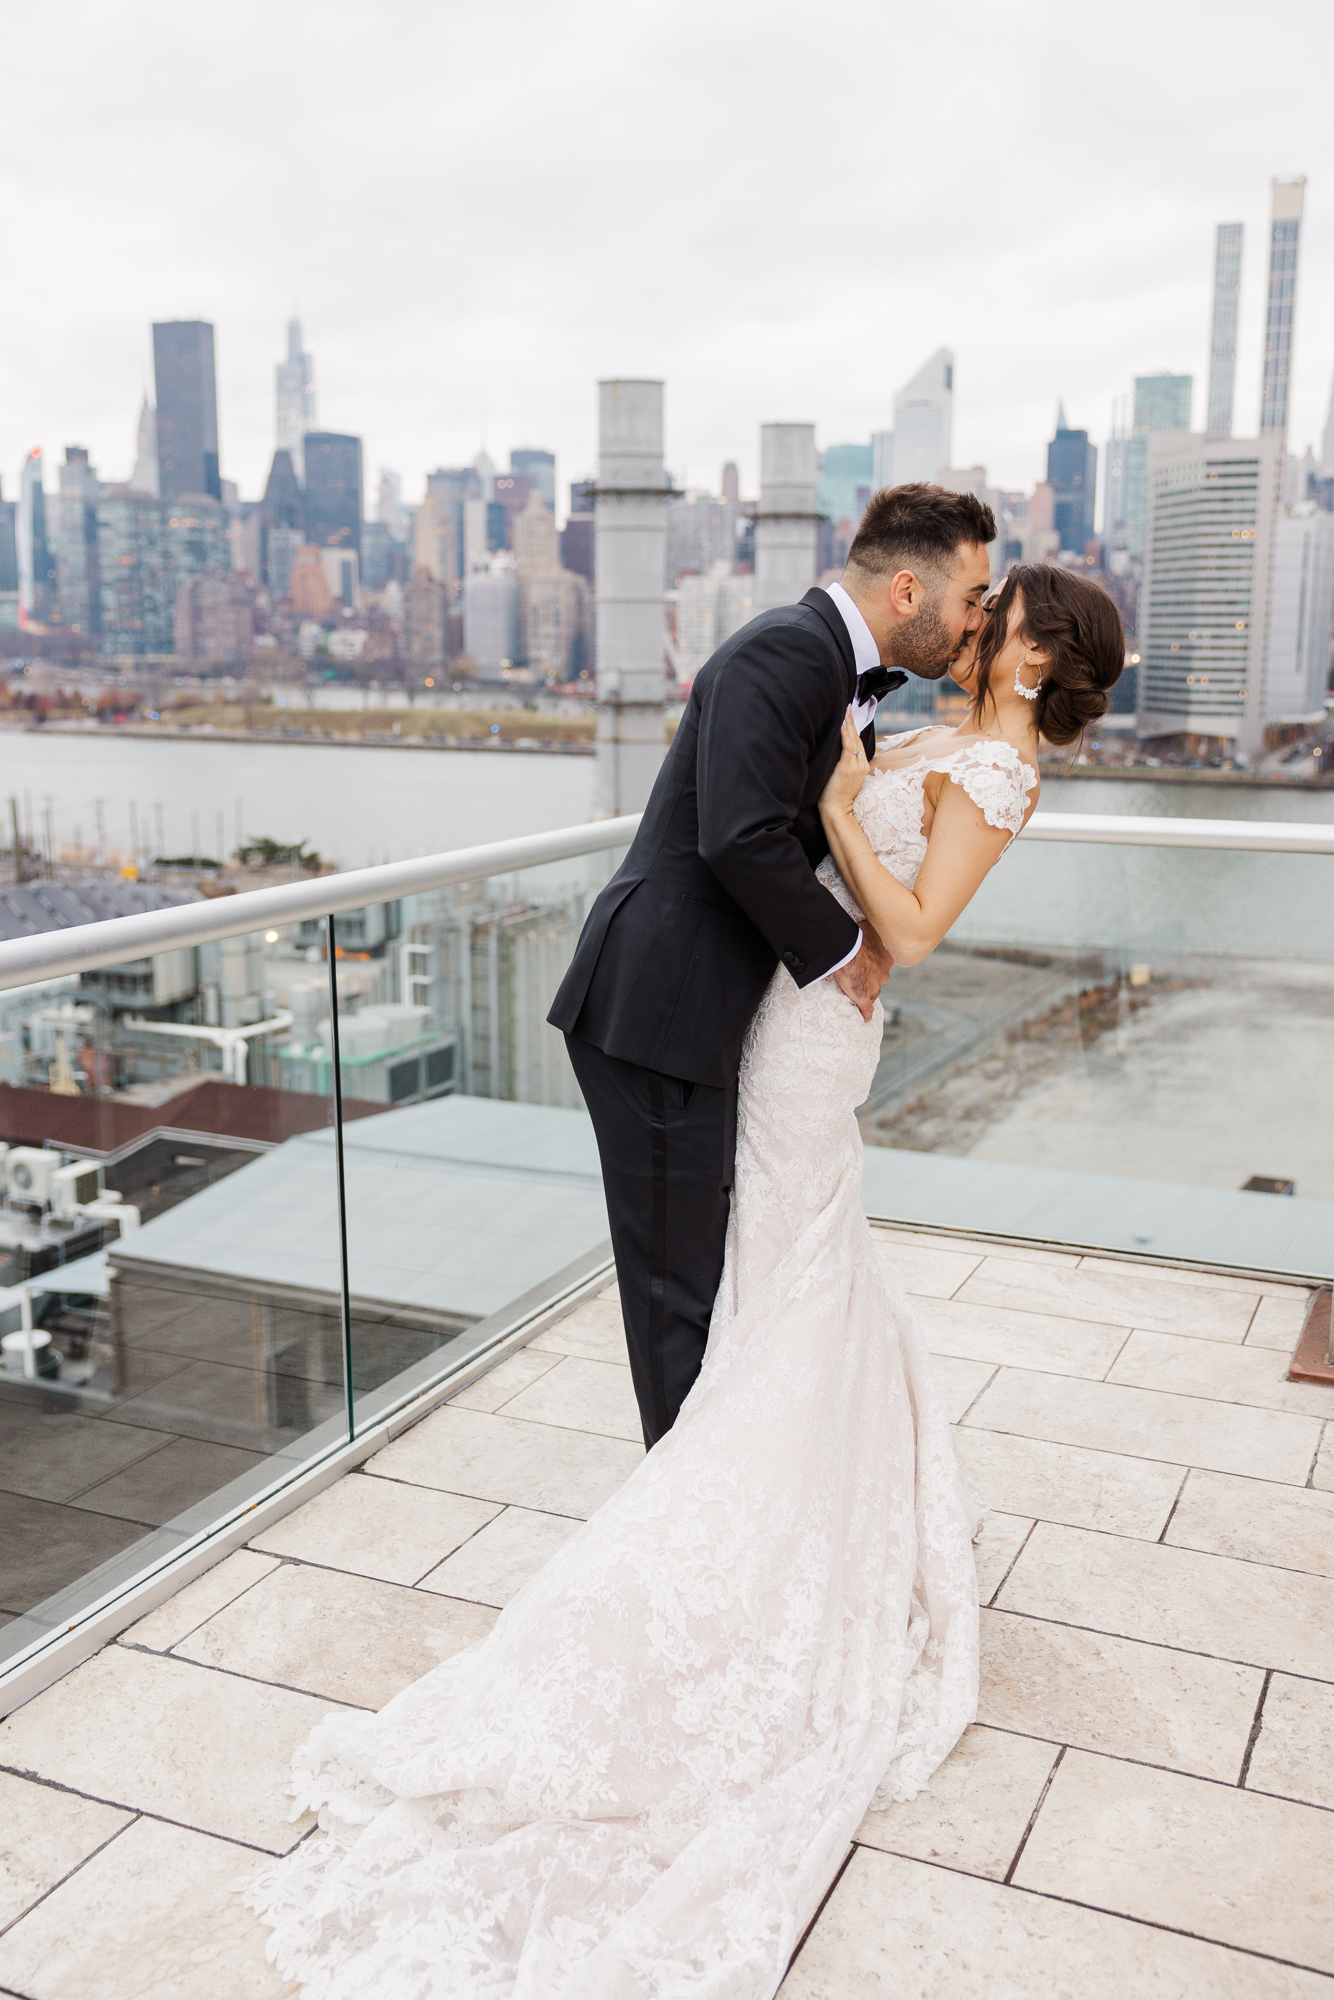 Unique Wedding Photo Must-Haves, NYC